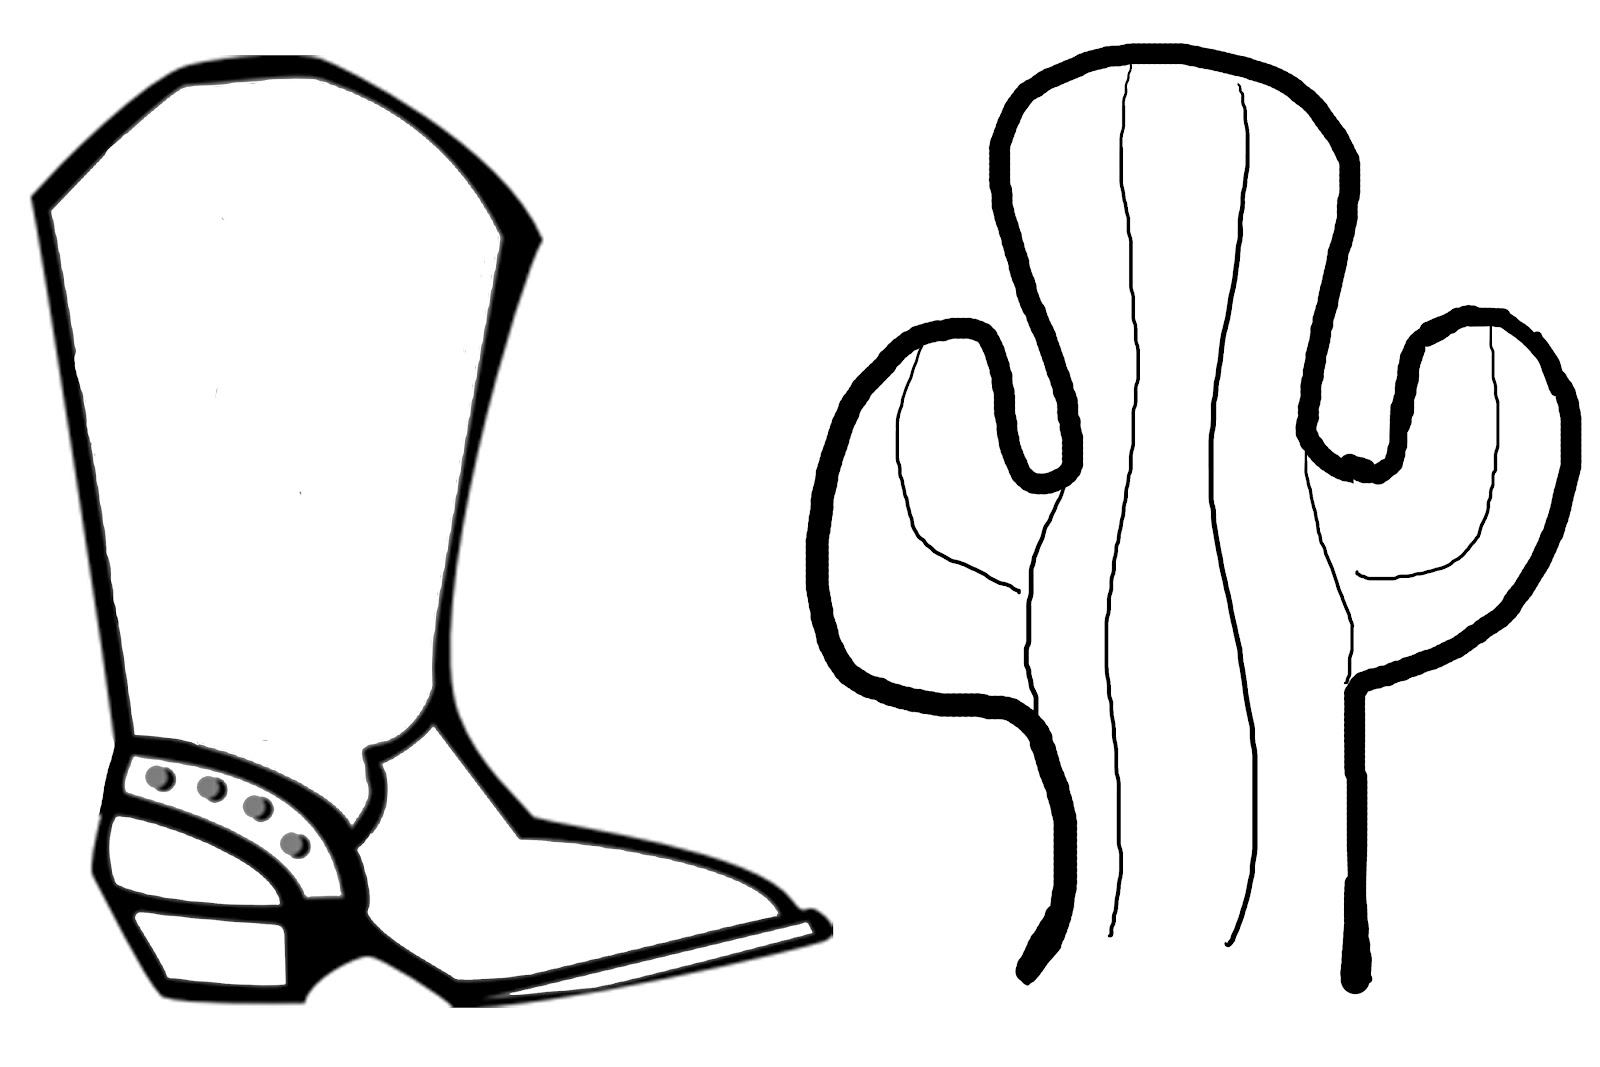 Trends For > Cowboy Boots Sketch